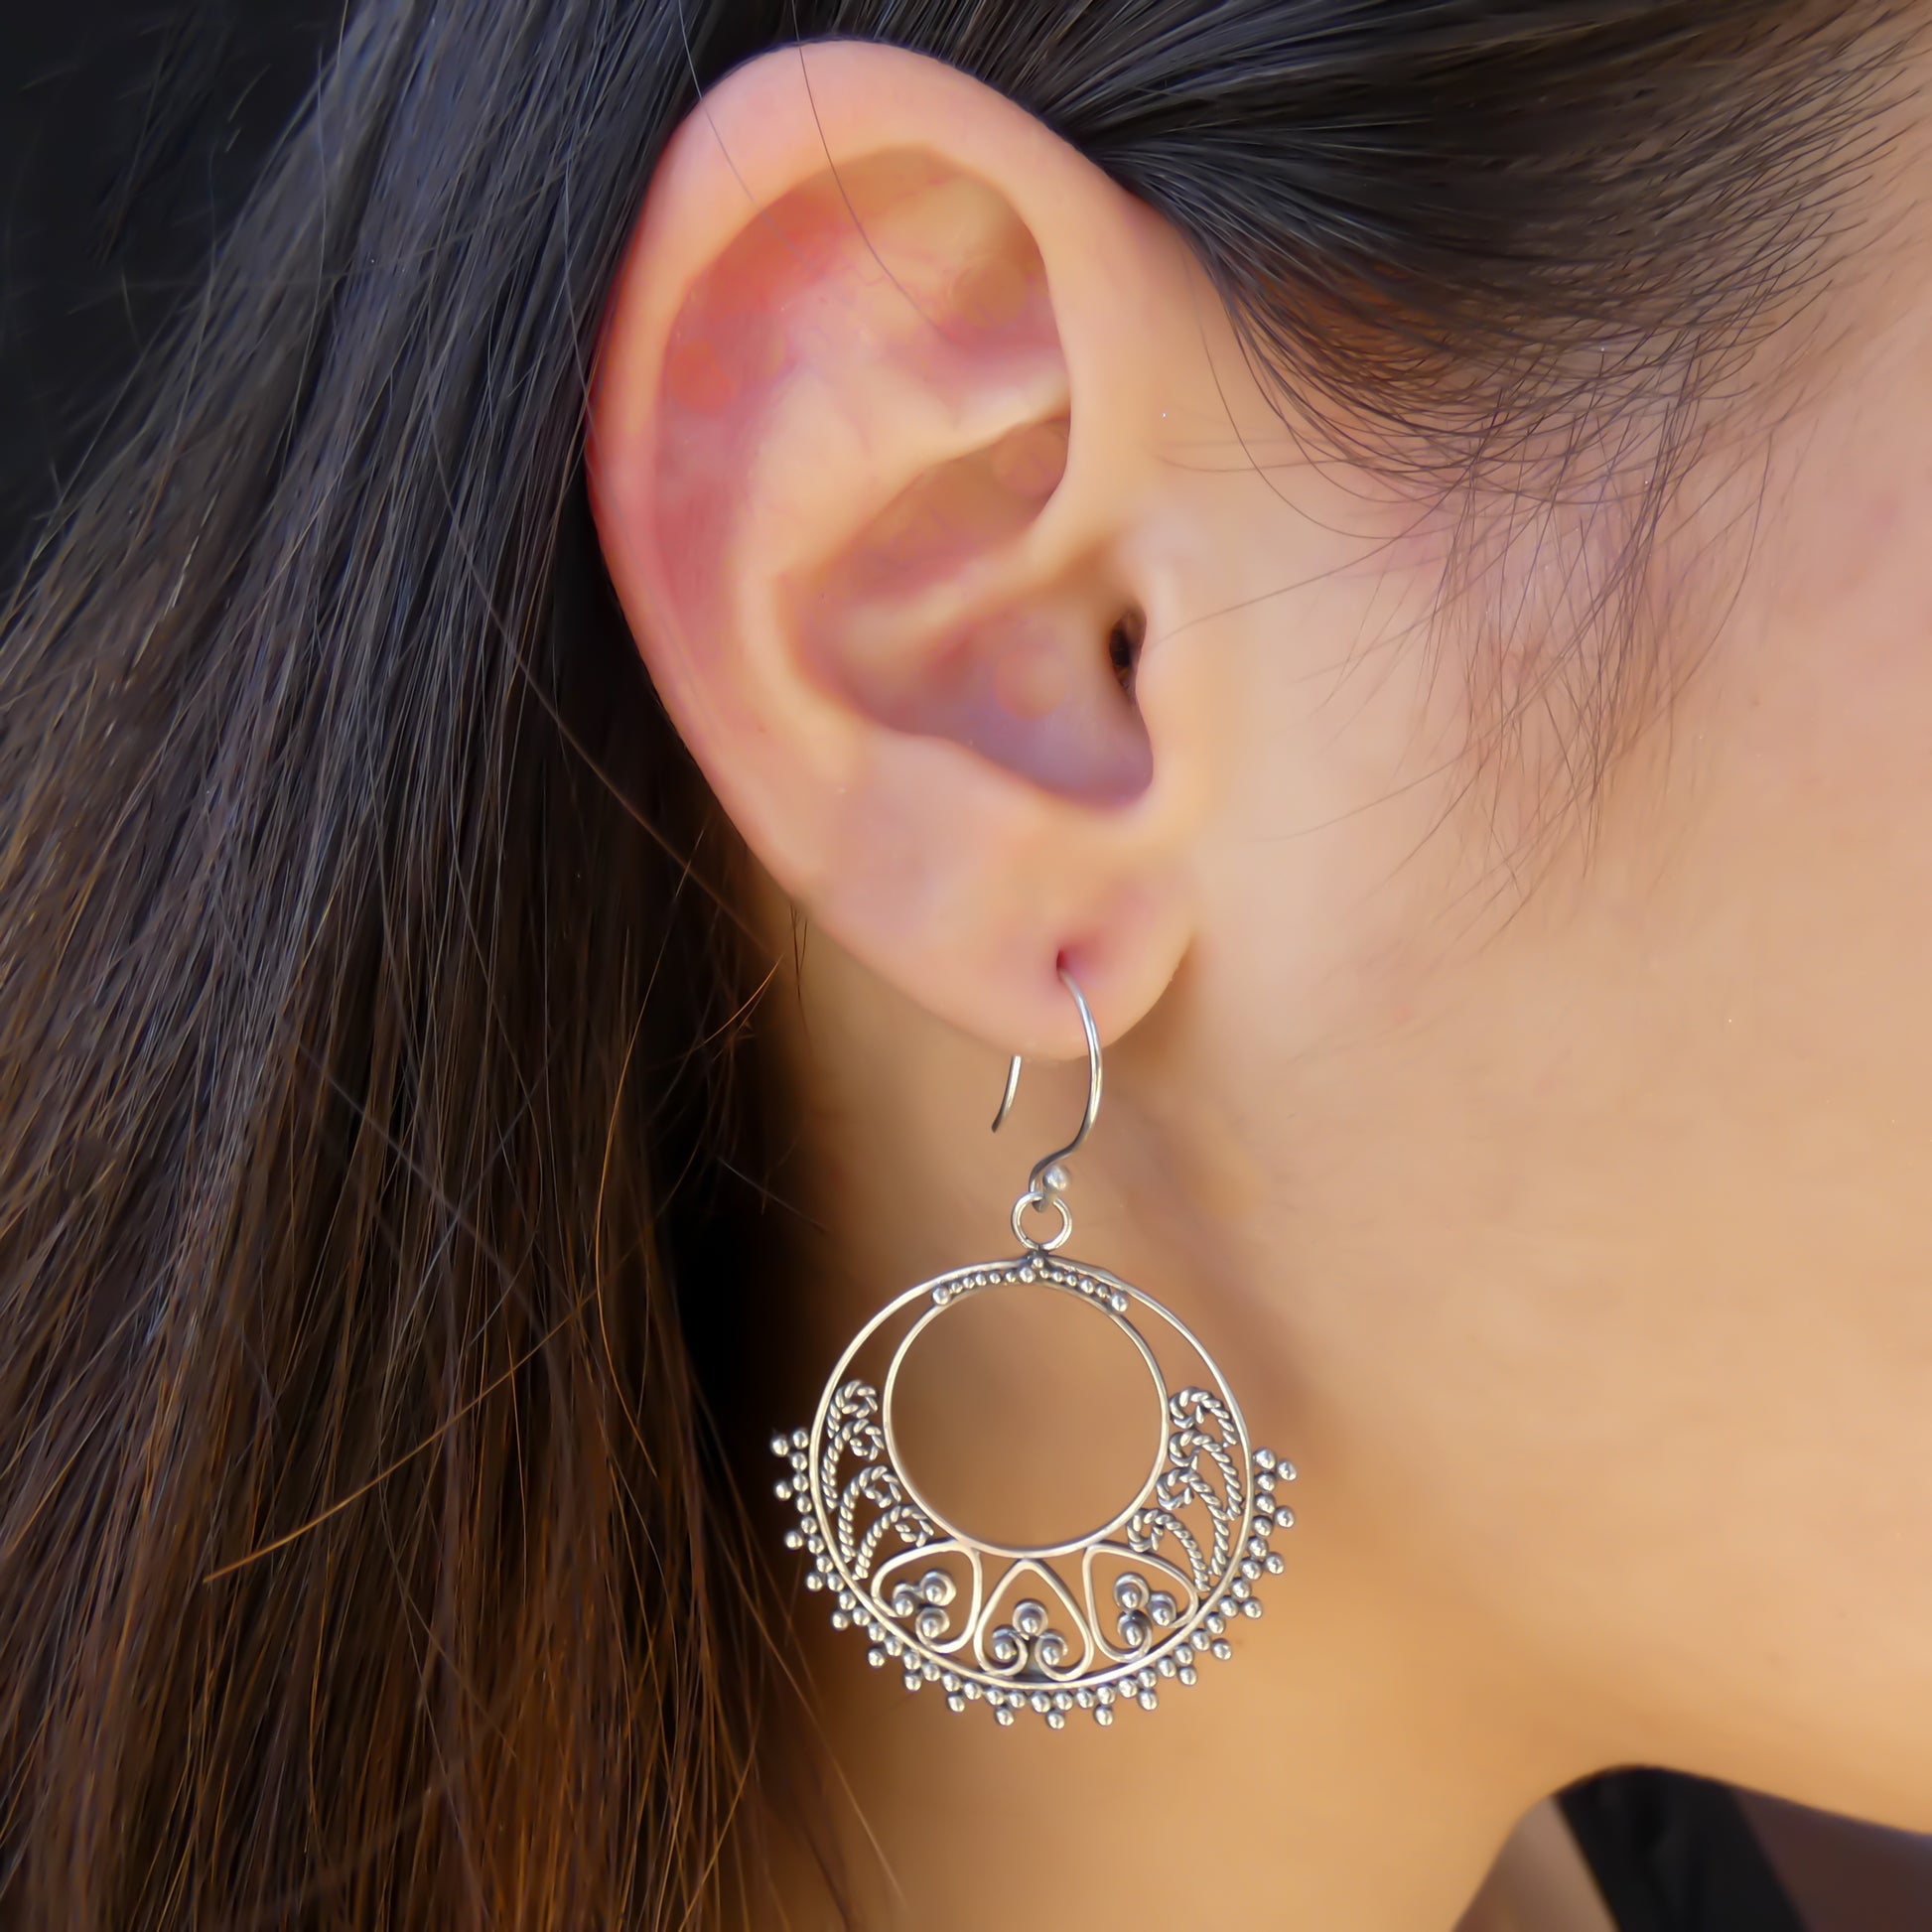 Silver wire and beads drop earrings worn by a woman.